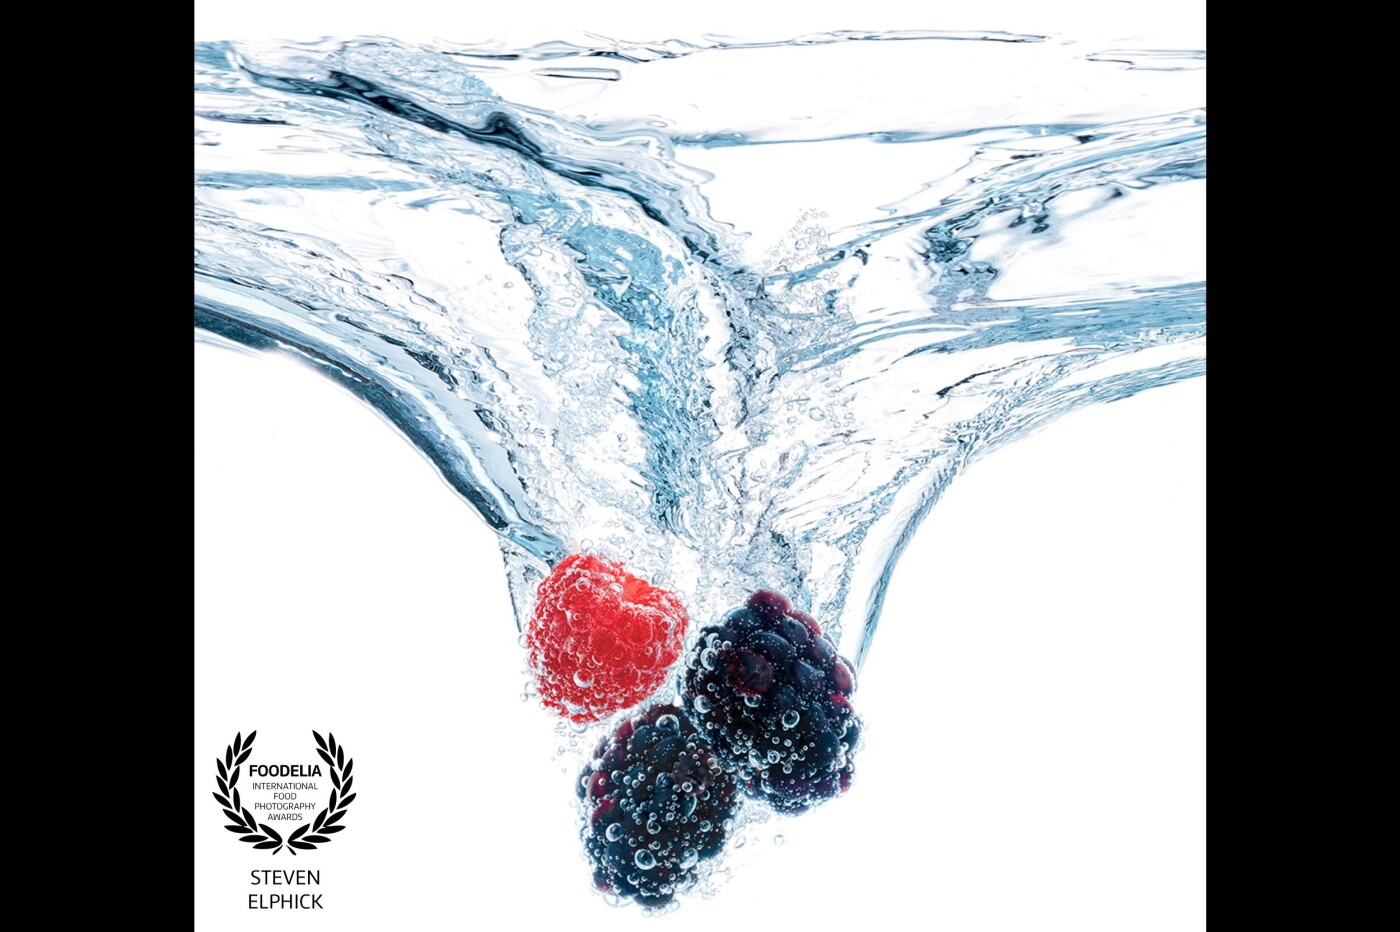 This hybrid image was created for a new unsweetened vodka-based beverage "SPLASH", a project with Sapporo of Japan.<br />
Both a large splash tank and a small bubble tank were used. Great fun was had using high-speed Broncolor flash units and Phase One medium format camera equipment. The concept required quite a variety of flavor options that featured large, heavy fruits like grapefruit down to tiny, light ones like berries.  Problem-solving required a master splash to be created to make the "sizzle" and preserve continuity in the packaging design. The flavor cues were shot separately to maximize the luscious textures and freshness of the fruits. Pre-light and test 1/2 day, shoot done in one day with a little high-speed video too.<br />
